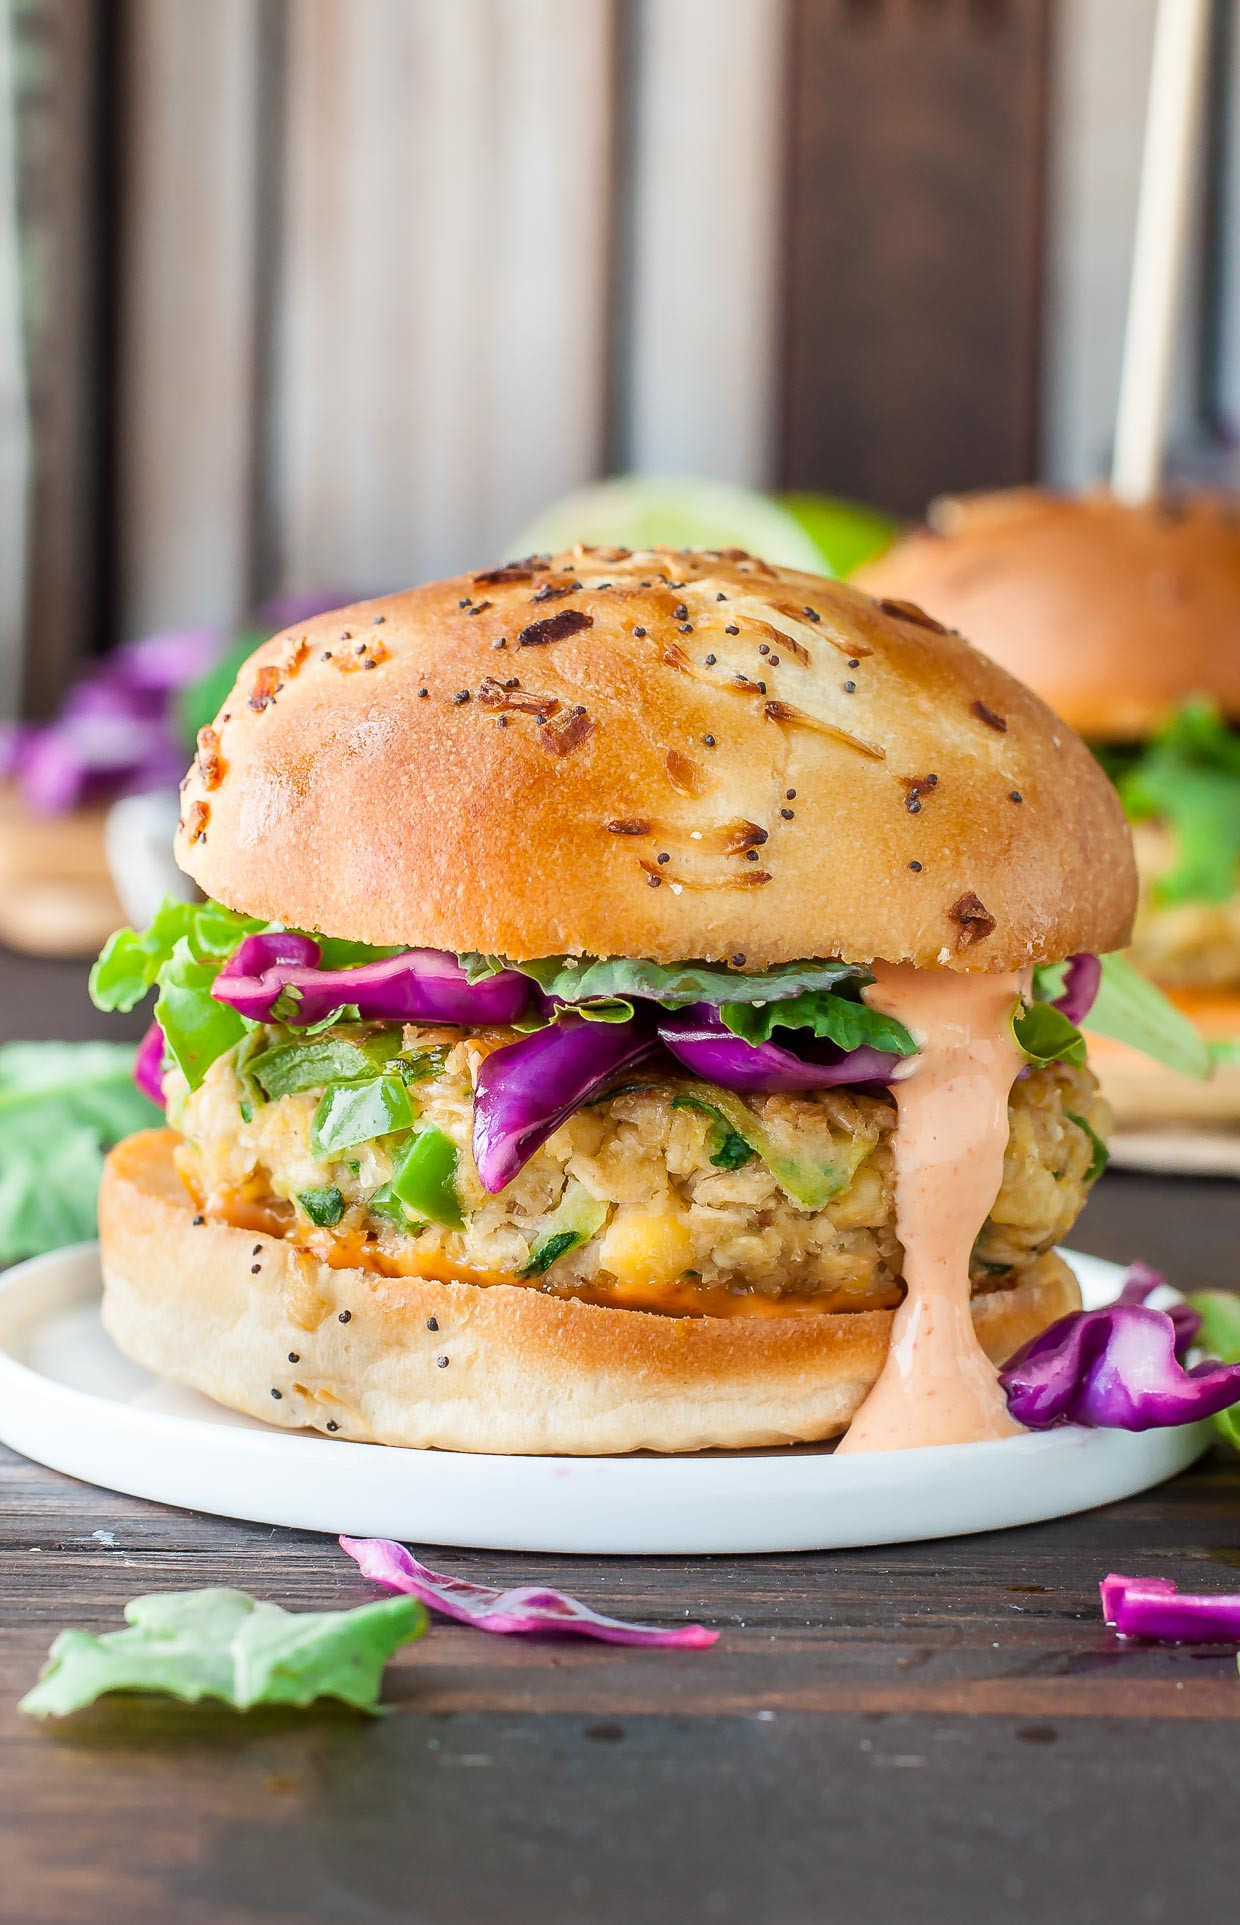 Vegan Chickpea Burgers Recipes
 Spicy Chickpea Veggie Burgers with Jalapeño and Zucchini